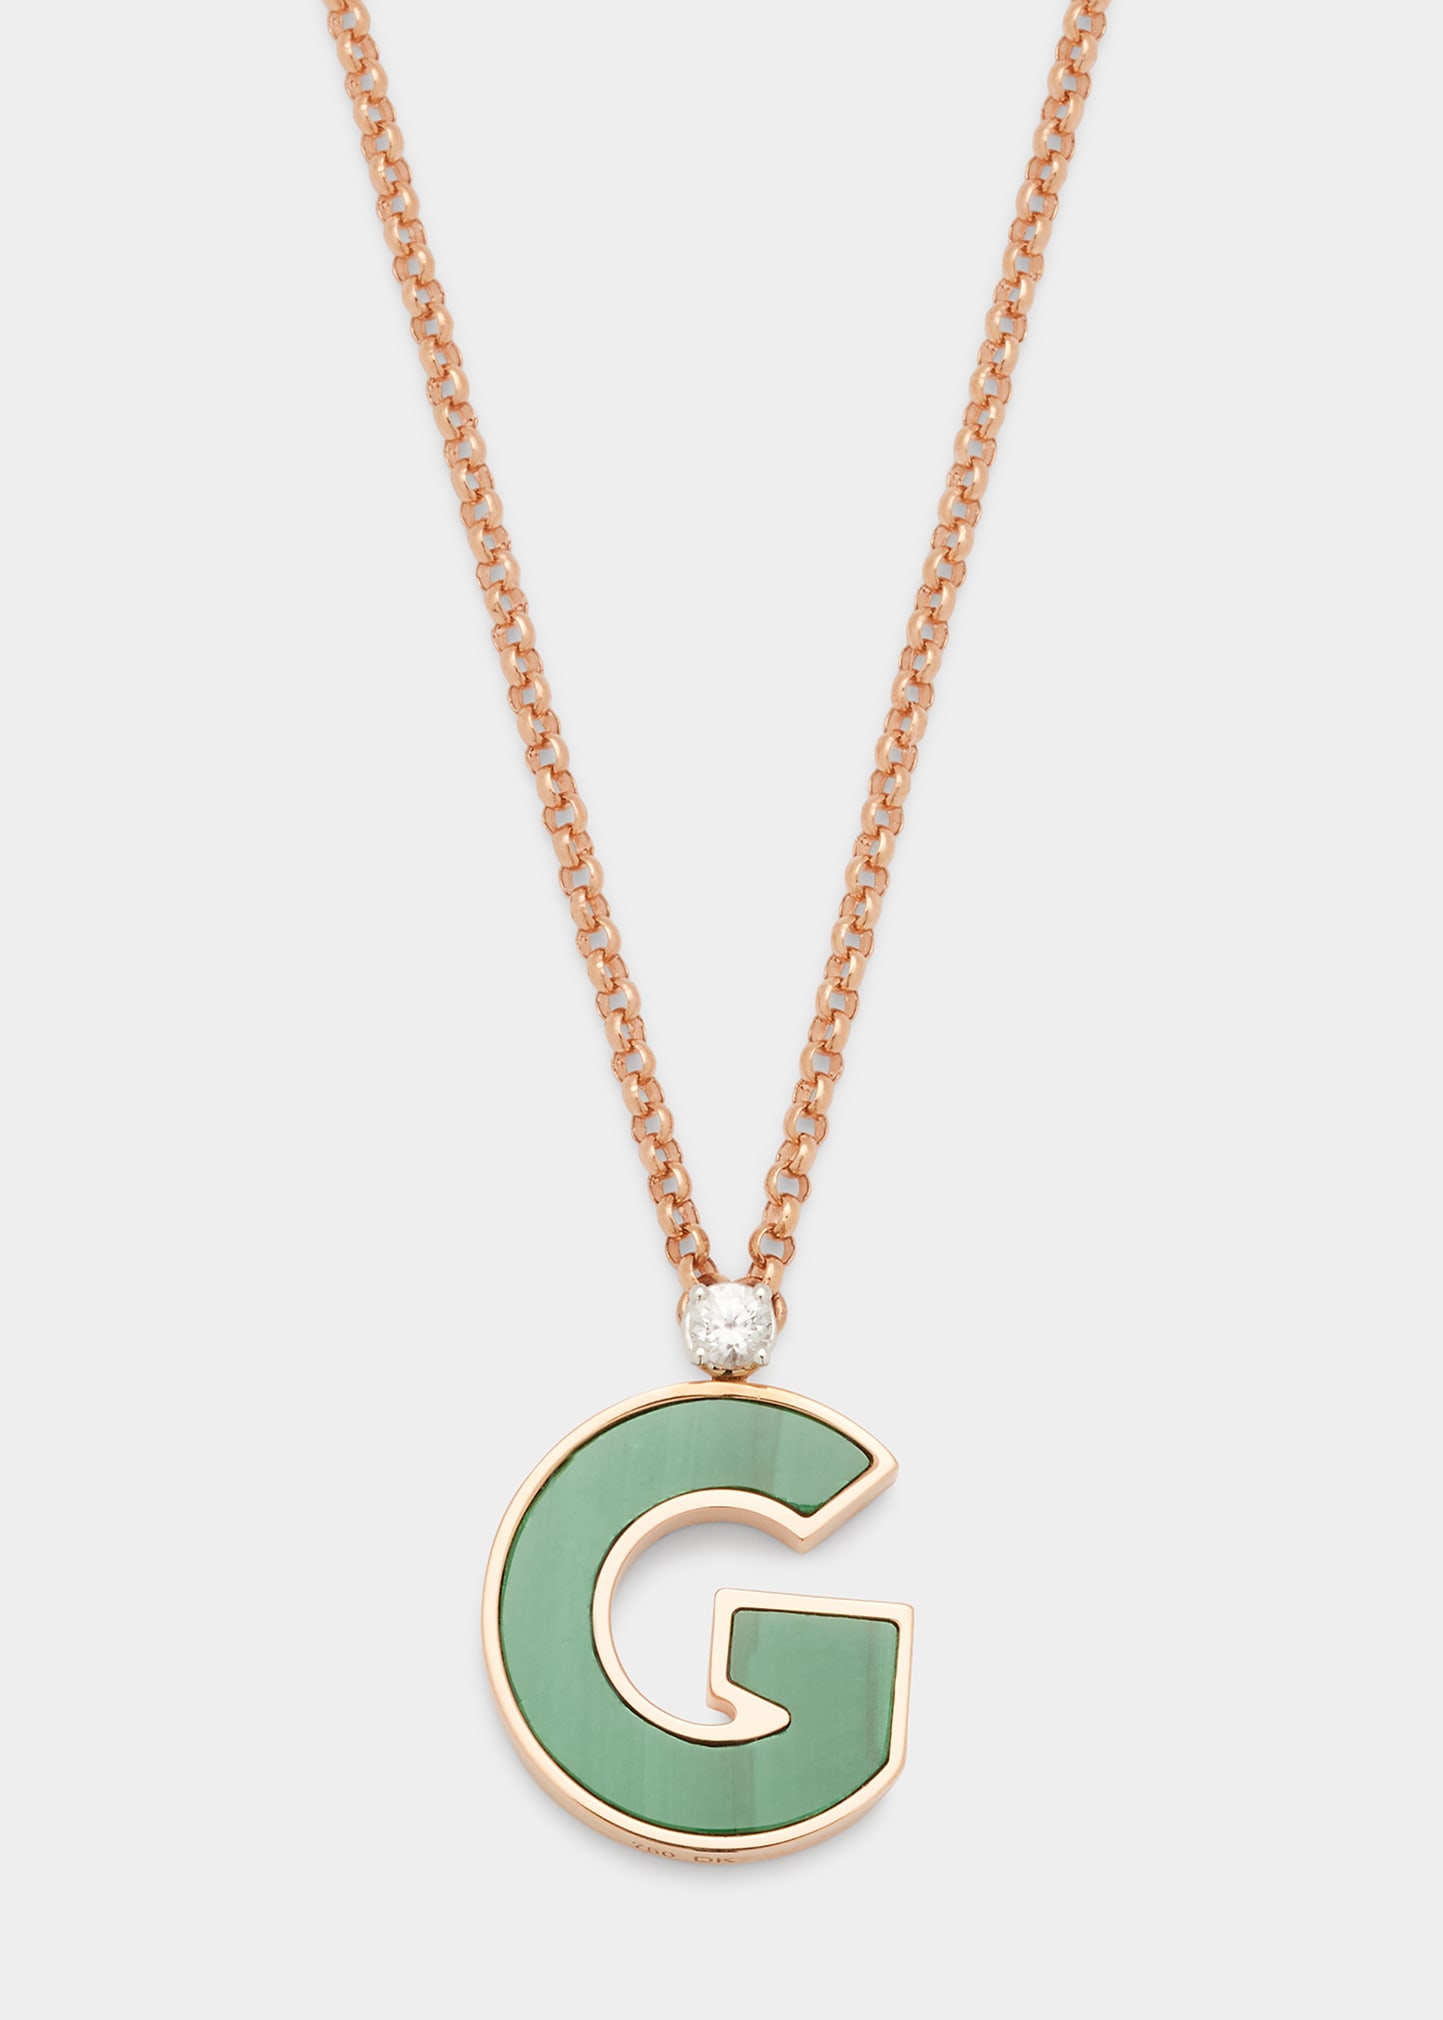 Rose Gold 'G' Letter Charm Necklace with Malachite and White Sapphire